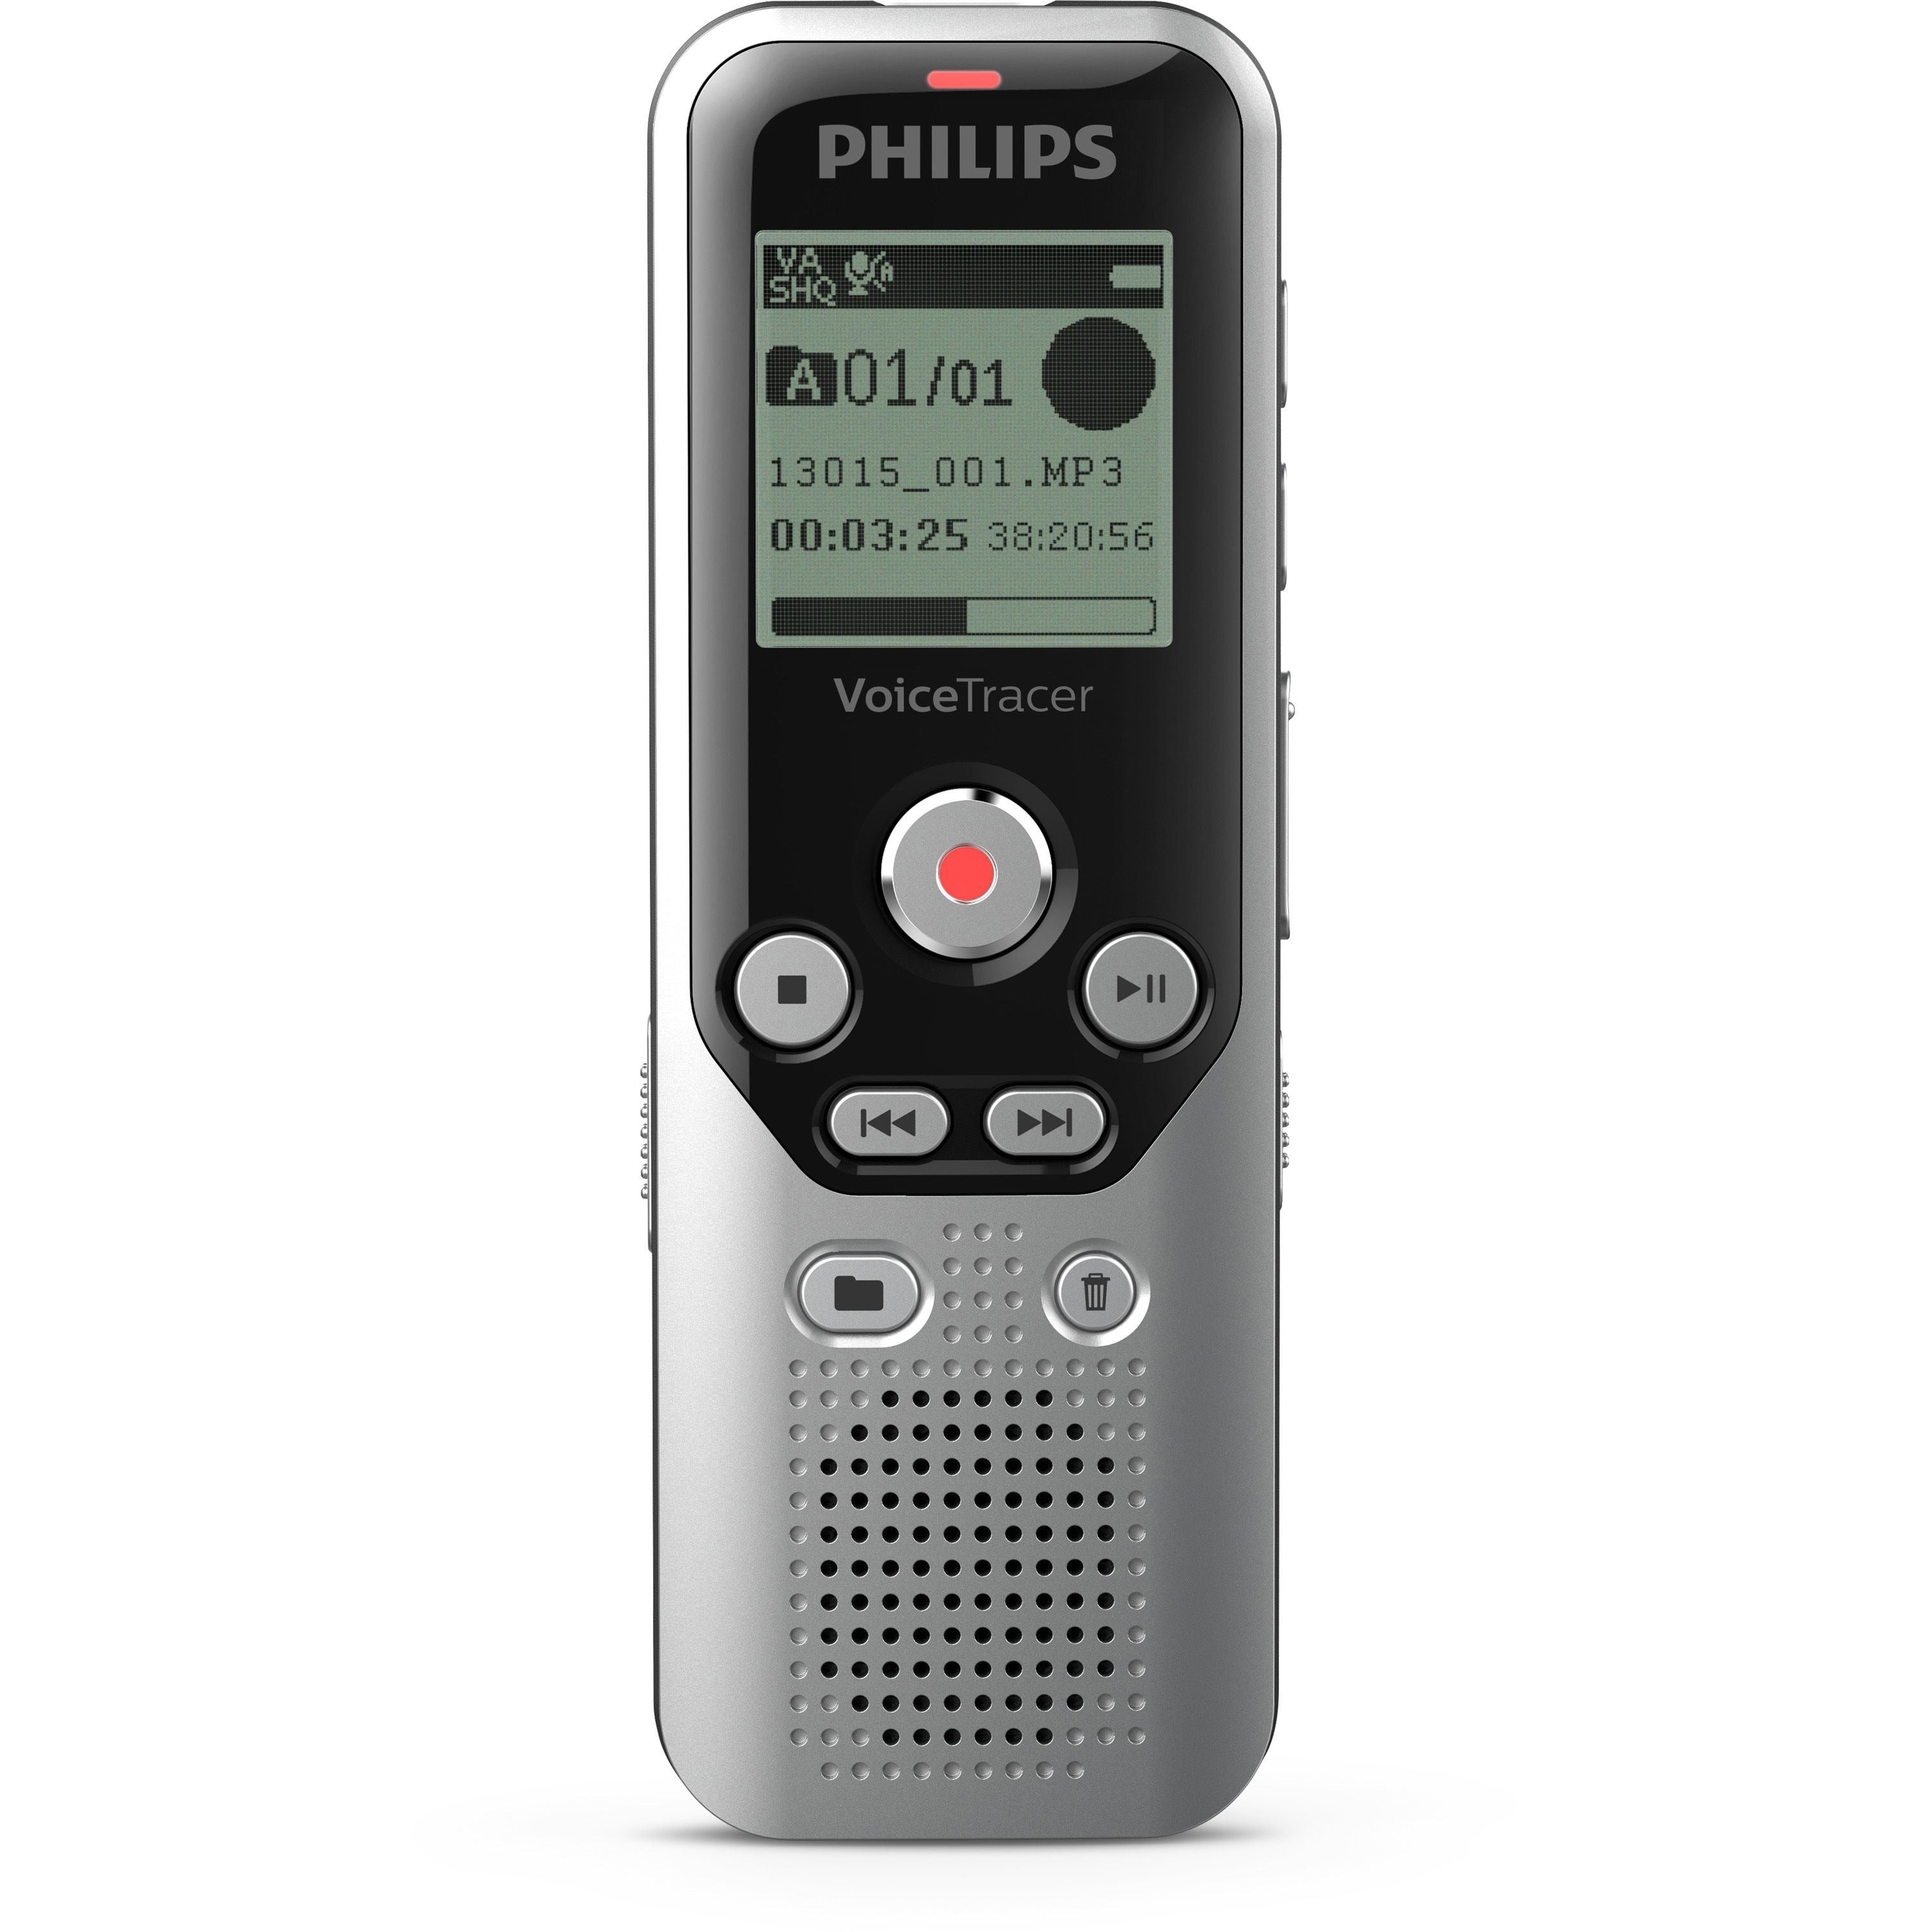 philips-voice-tracer-audio-recorder-dvt1250-8-gbmicrosd-sd-supported-13-lcd-wav-headphone-583-hourspeacerecording-time-portable_pspdvt1250 - 1